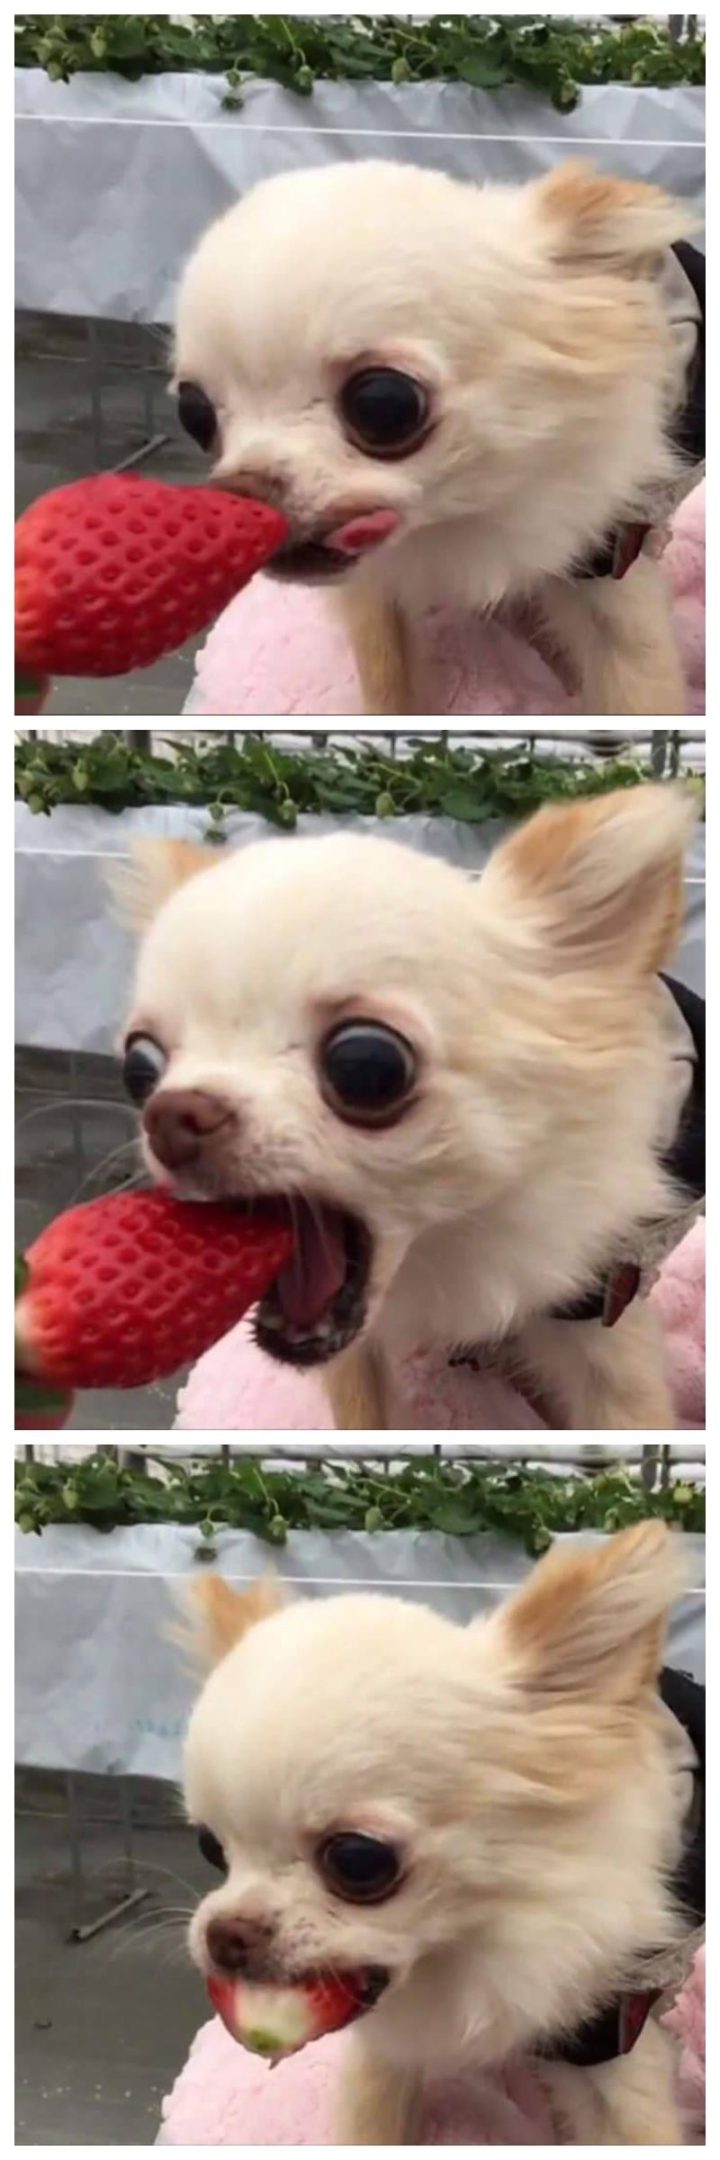 Derp dog eating a strawberry.